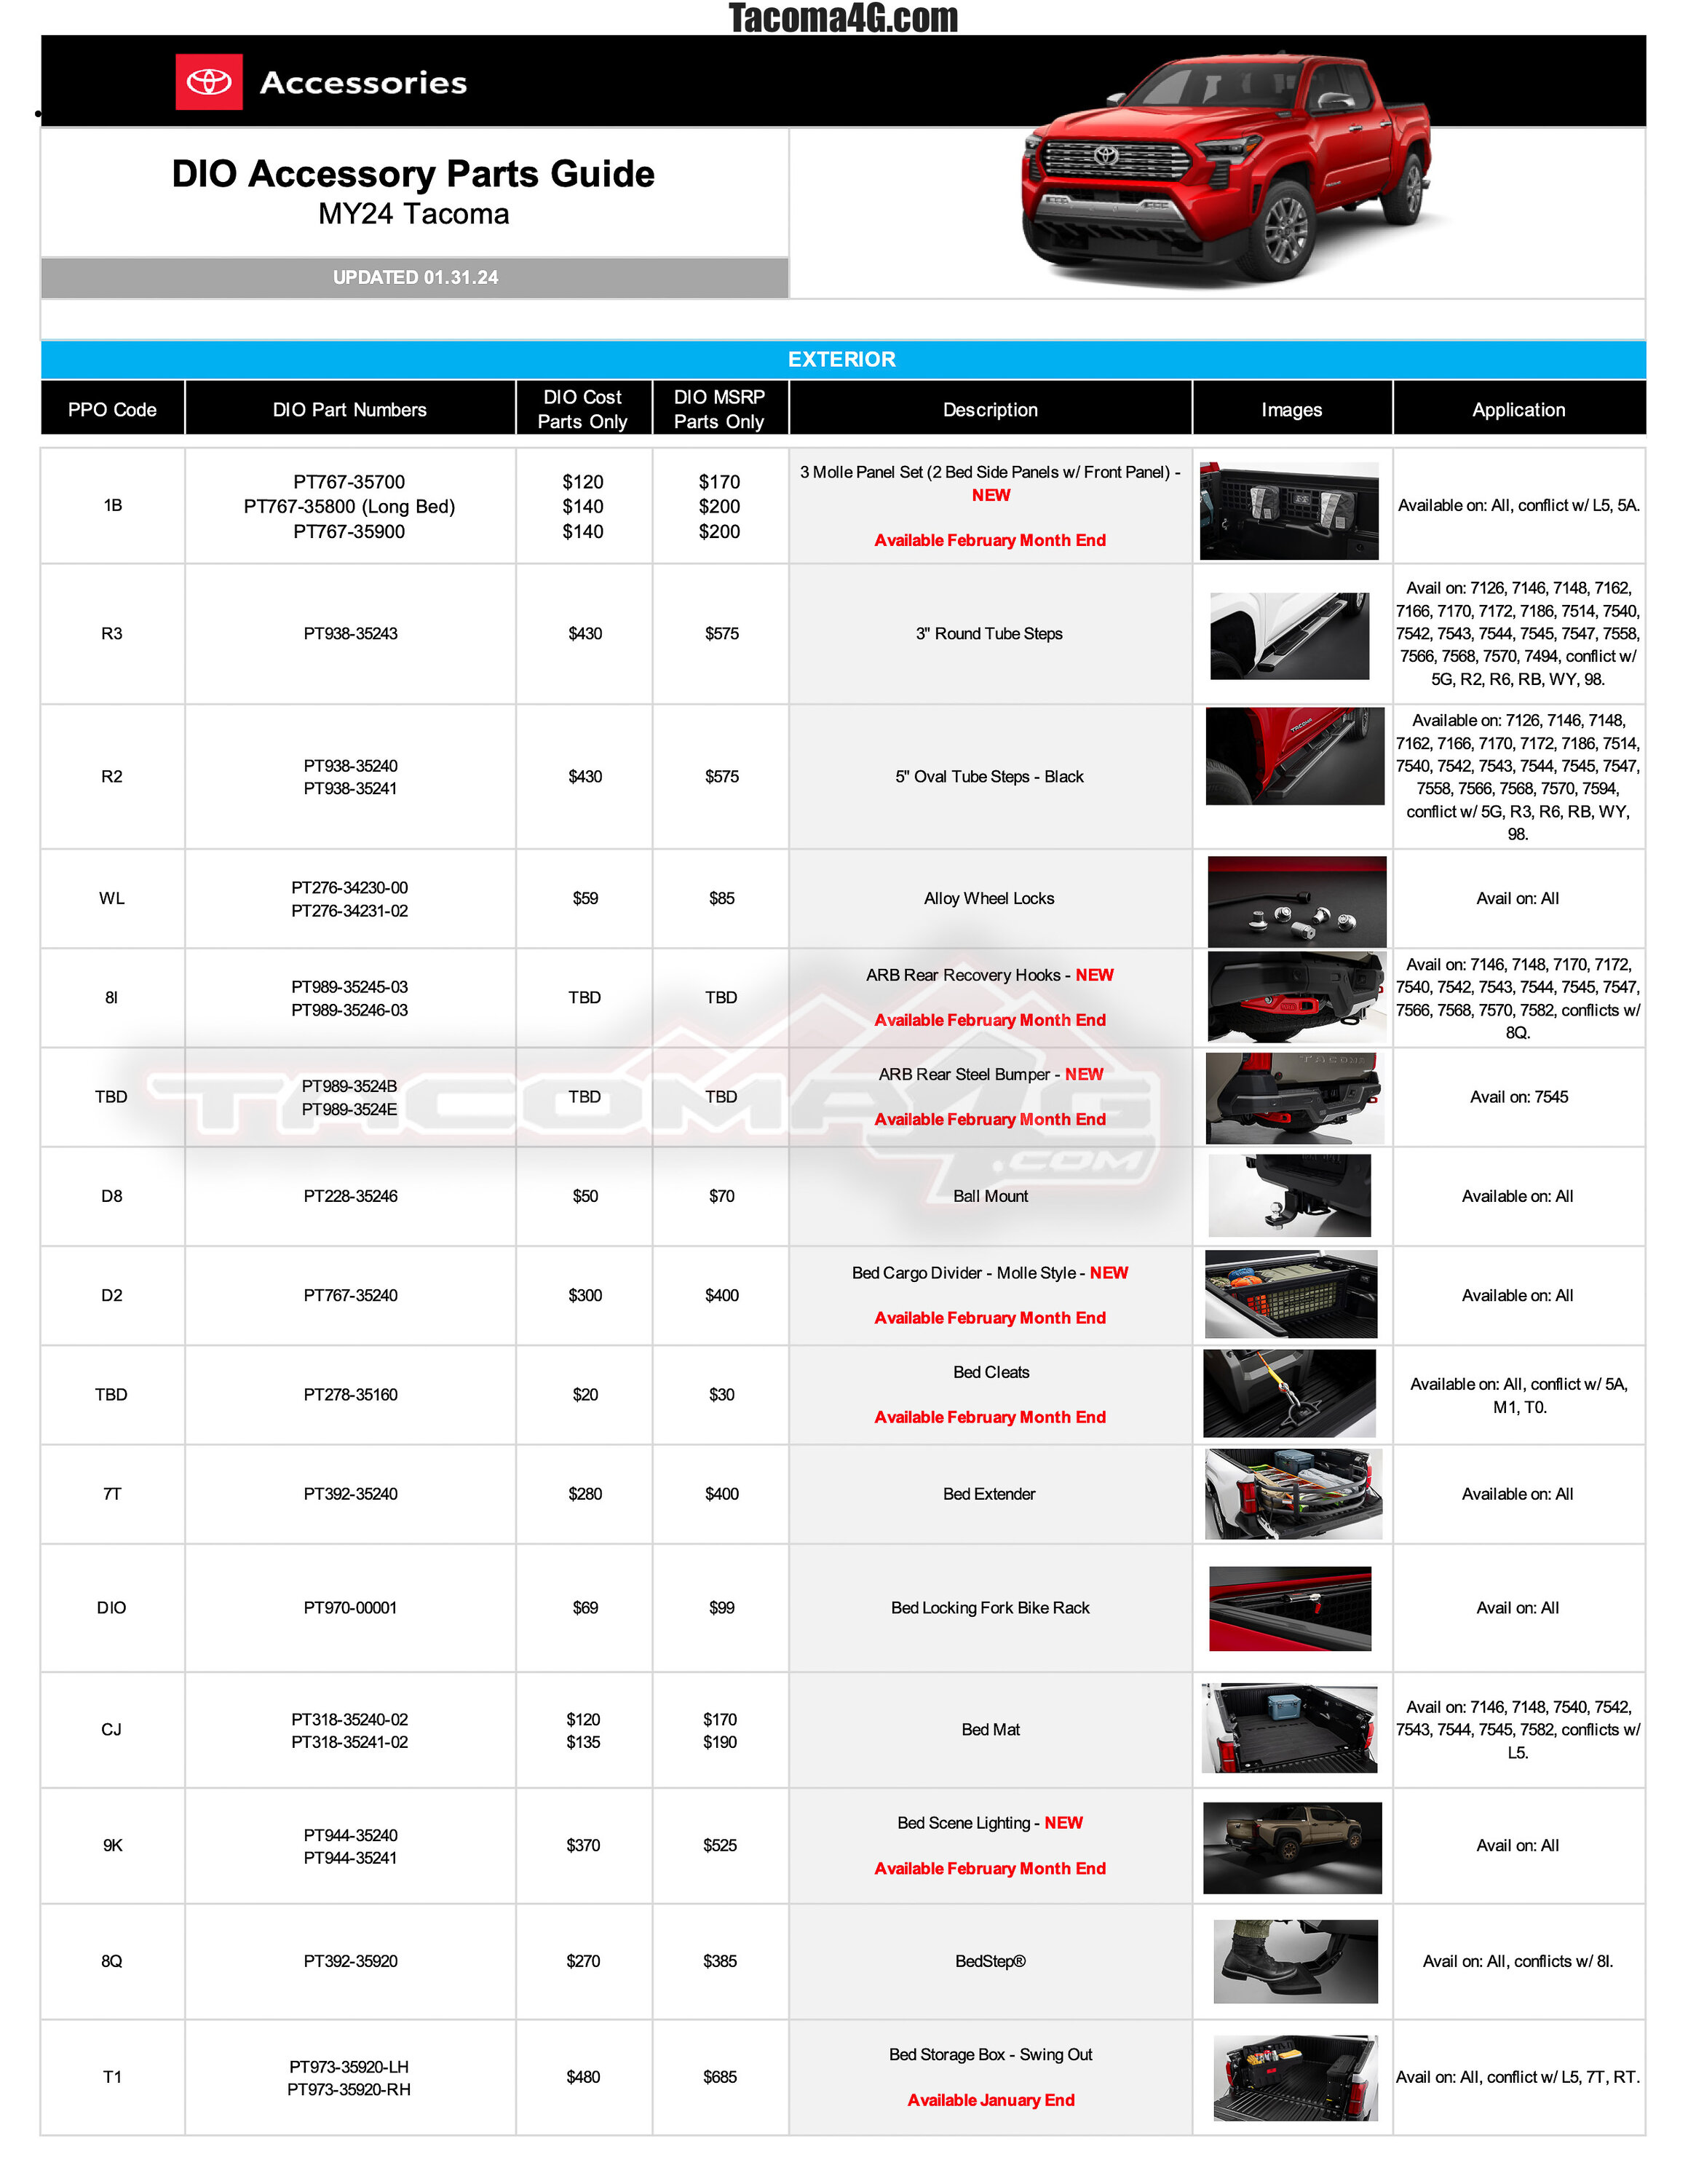 2024 Tacoma 2024 Tacoma Dealer Installed Options (DIO) Accessories Parts Guide + Pricing (Updated 5/7/24) 2024-Tacoma-DIO-Accessories-Parts-Guide_01_31_24-1